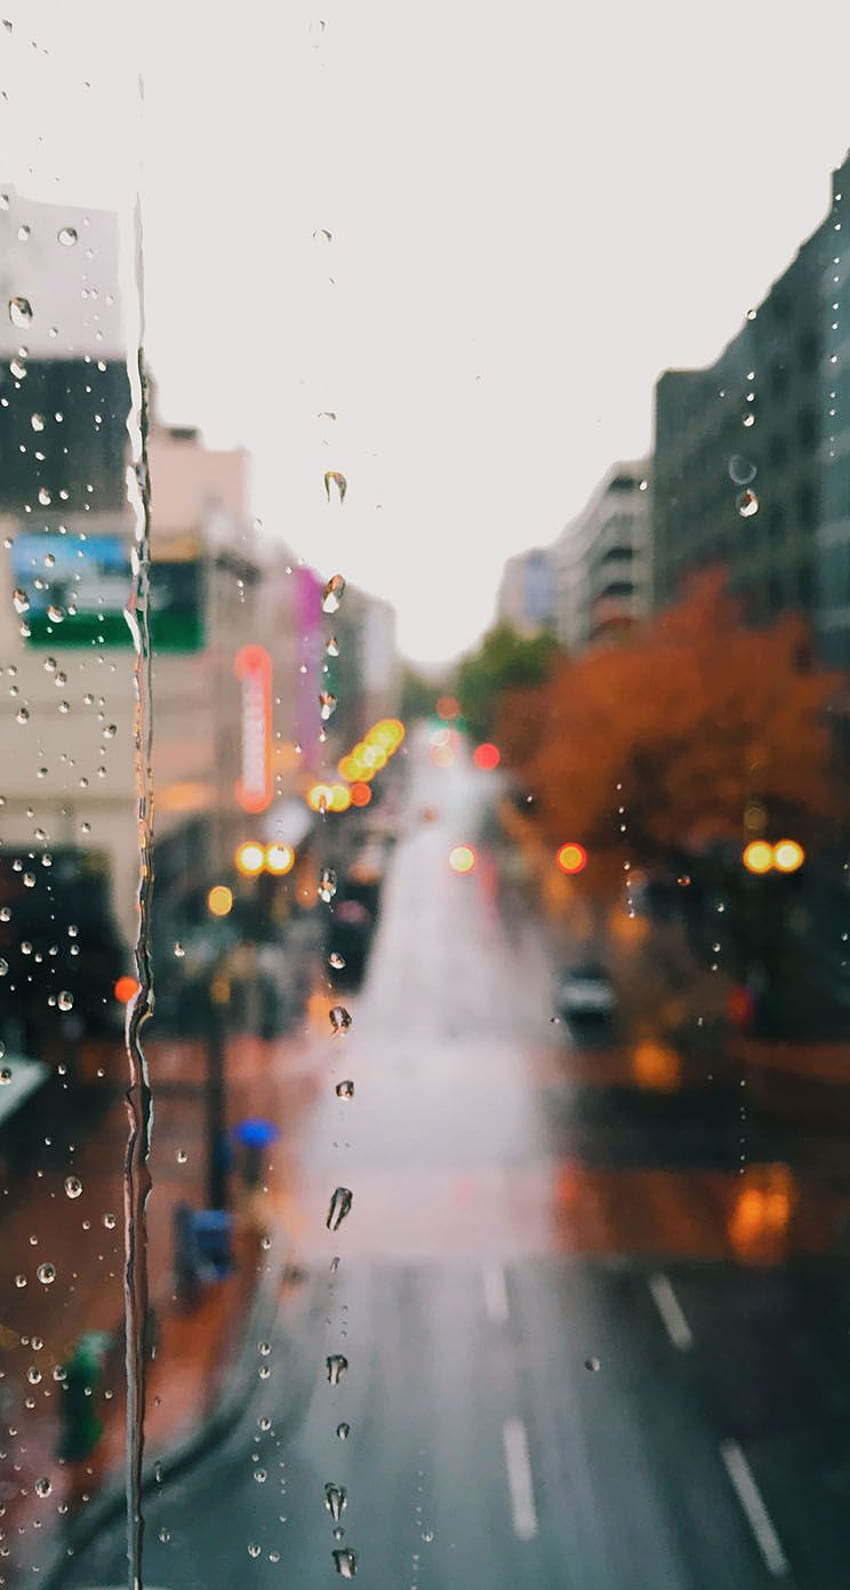 The iPhone Waiting for the Rain to Stop, Rainy Window HD phone wallpaper